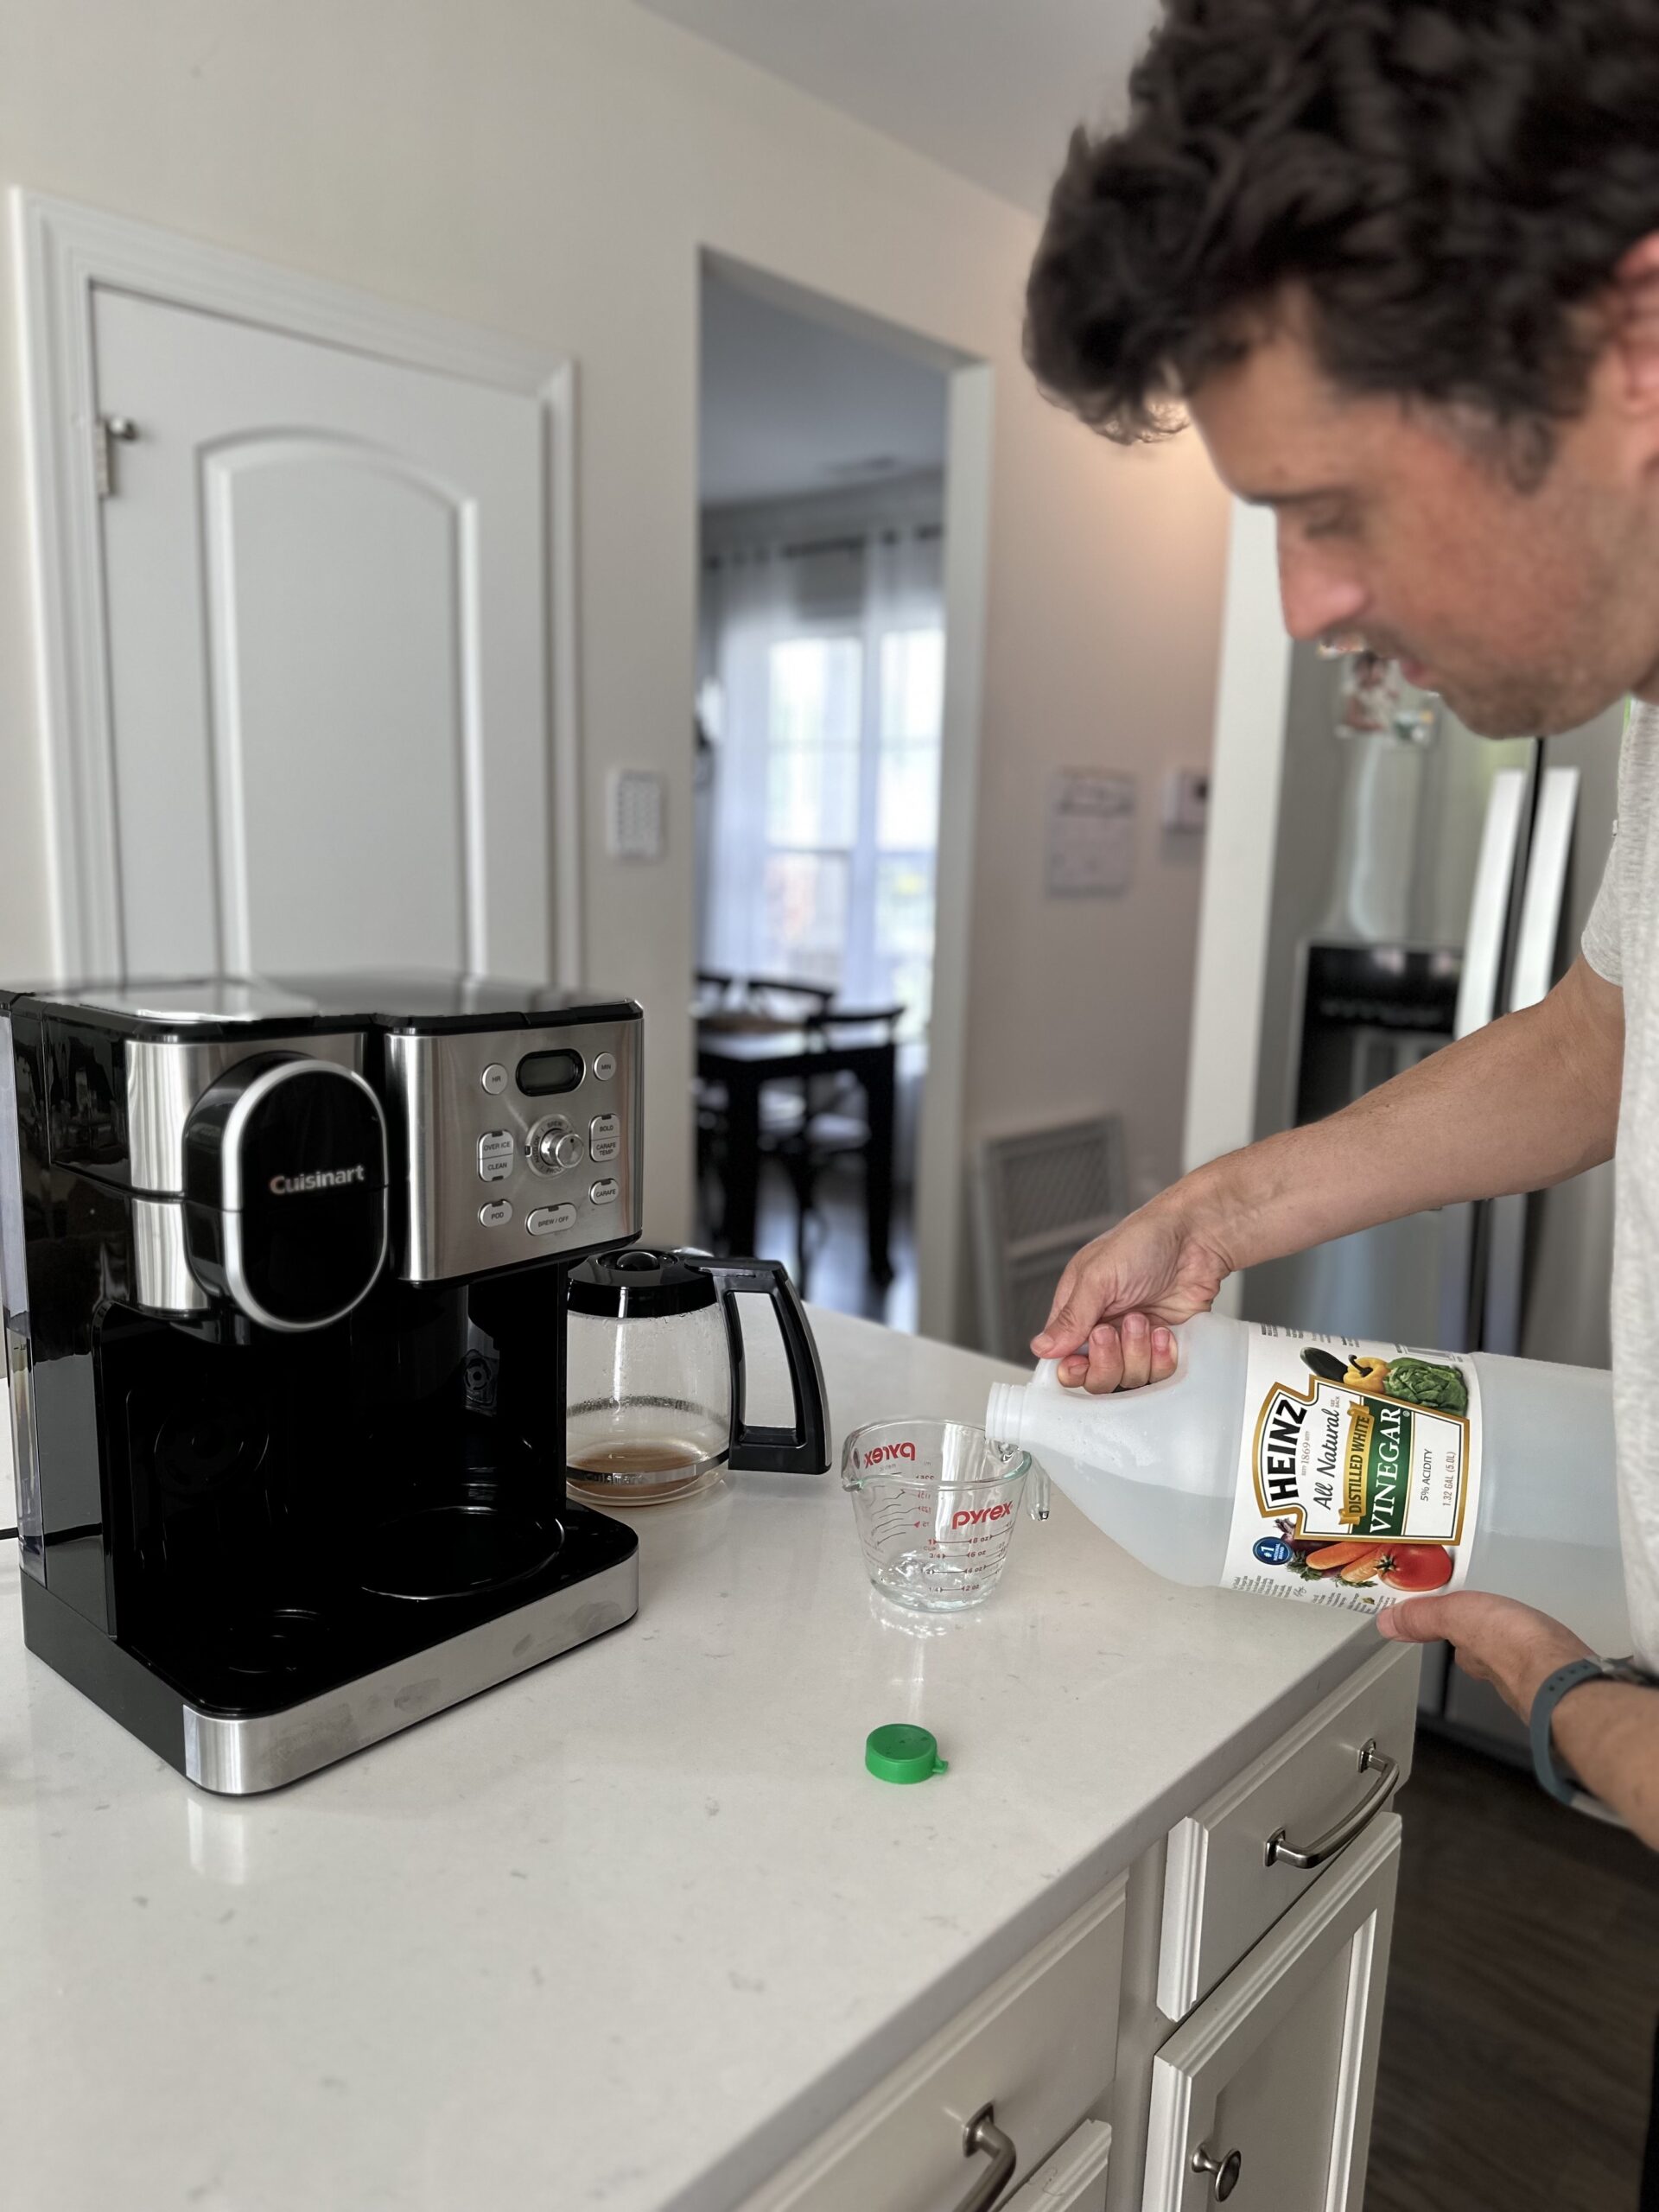 the author pouring vinegar into a measuring cup with coffee maker on kitchen counter